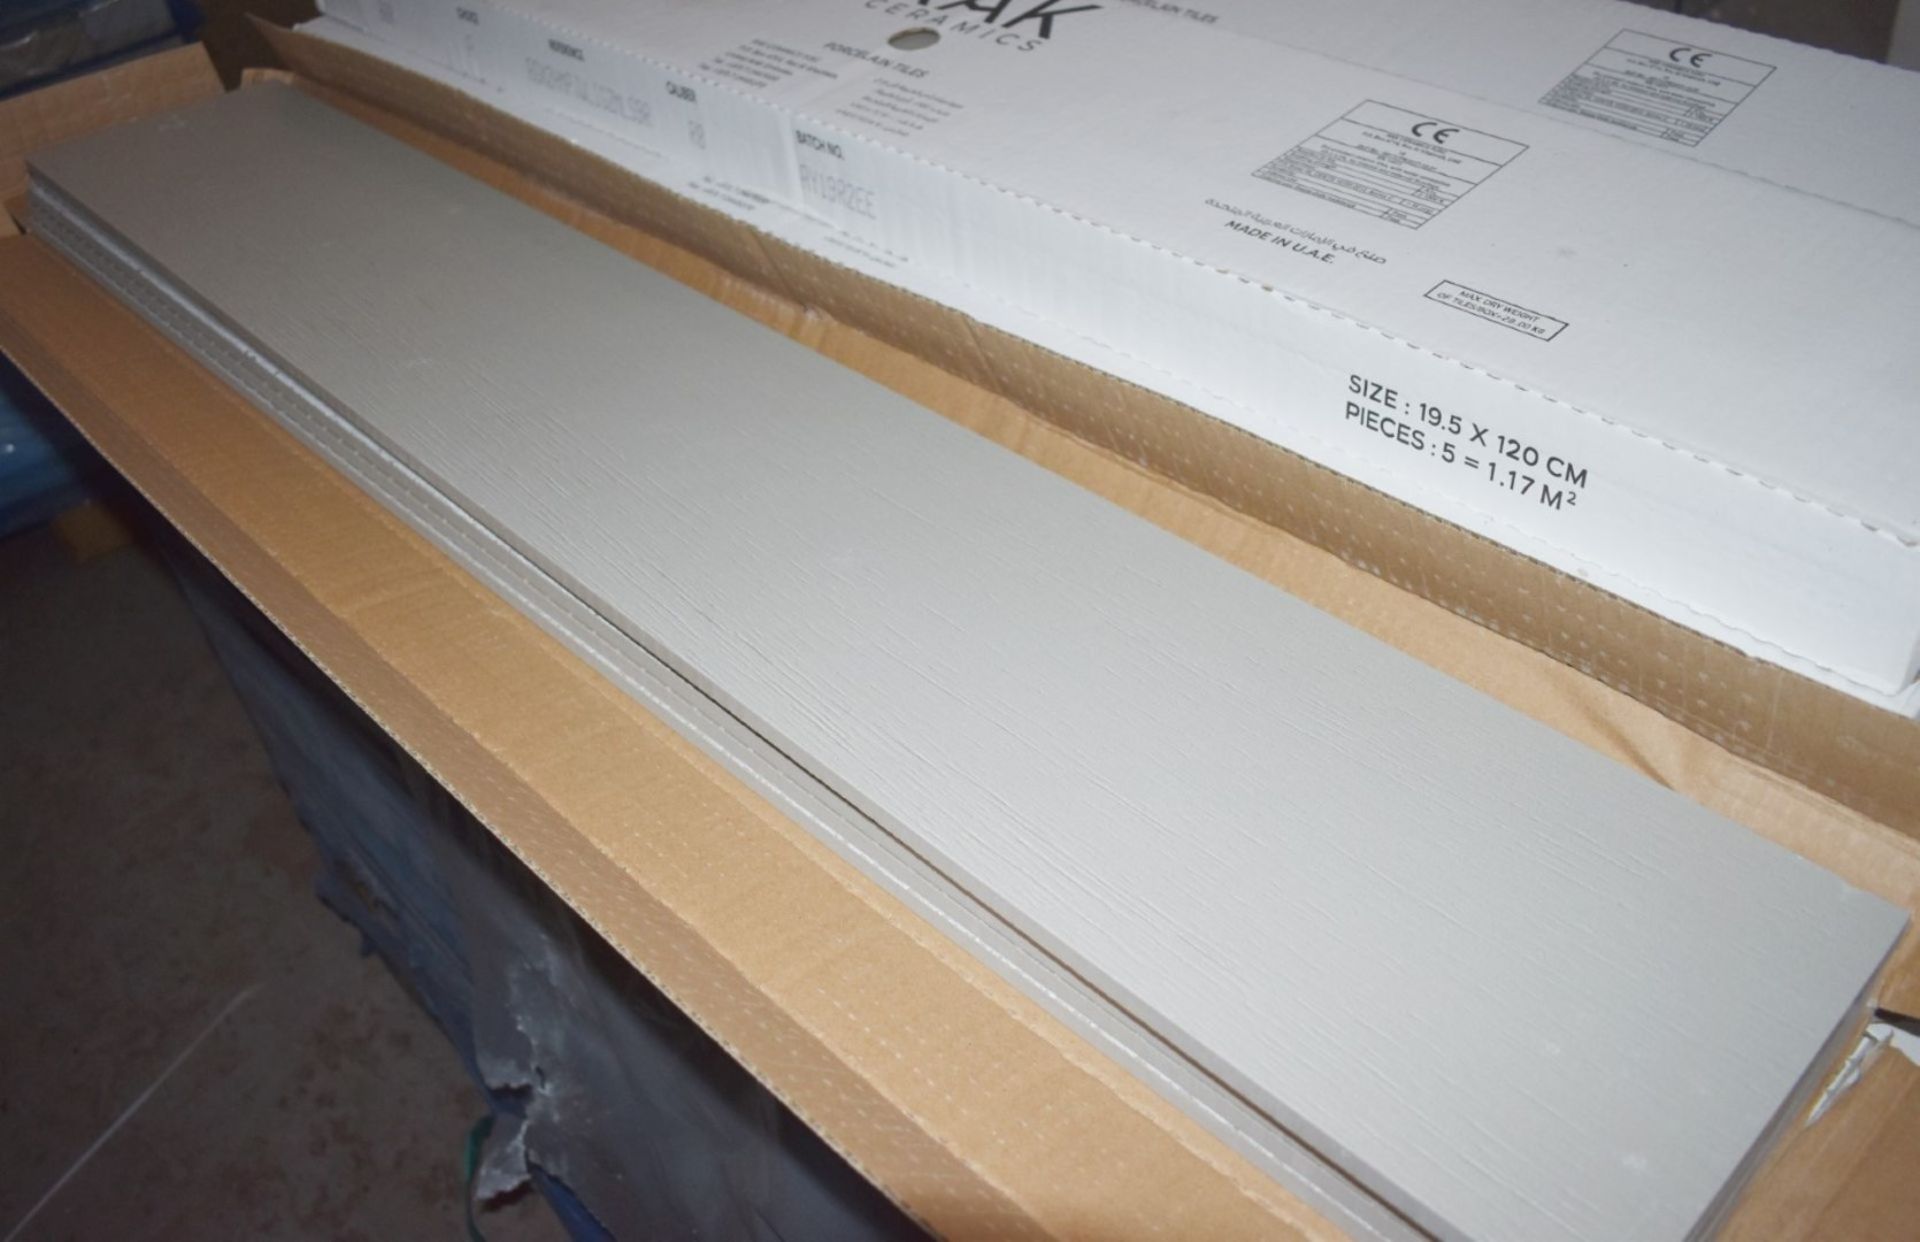 12 x Boxes of RAK Porcelain Floor or Wall Tiles - M Project Wood Design in Light Grey - 19.5 x 120 c - Image 4 of 11